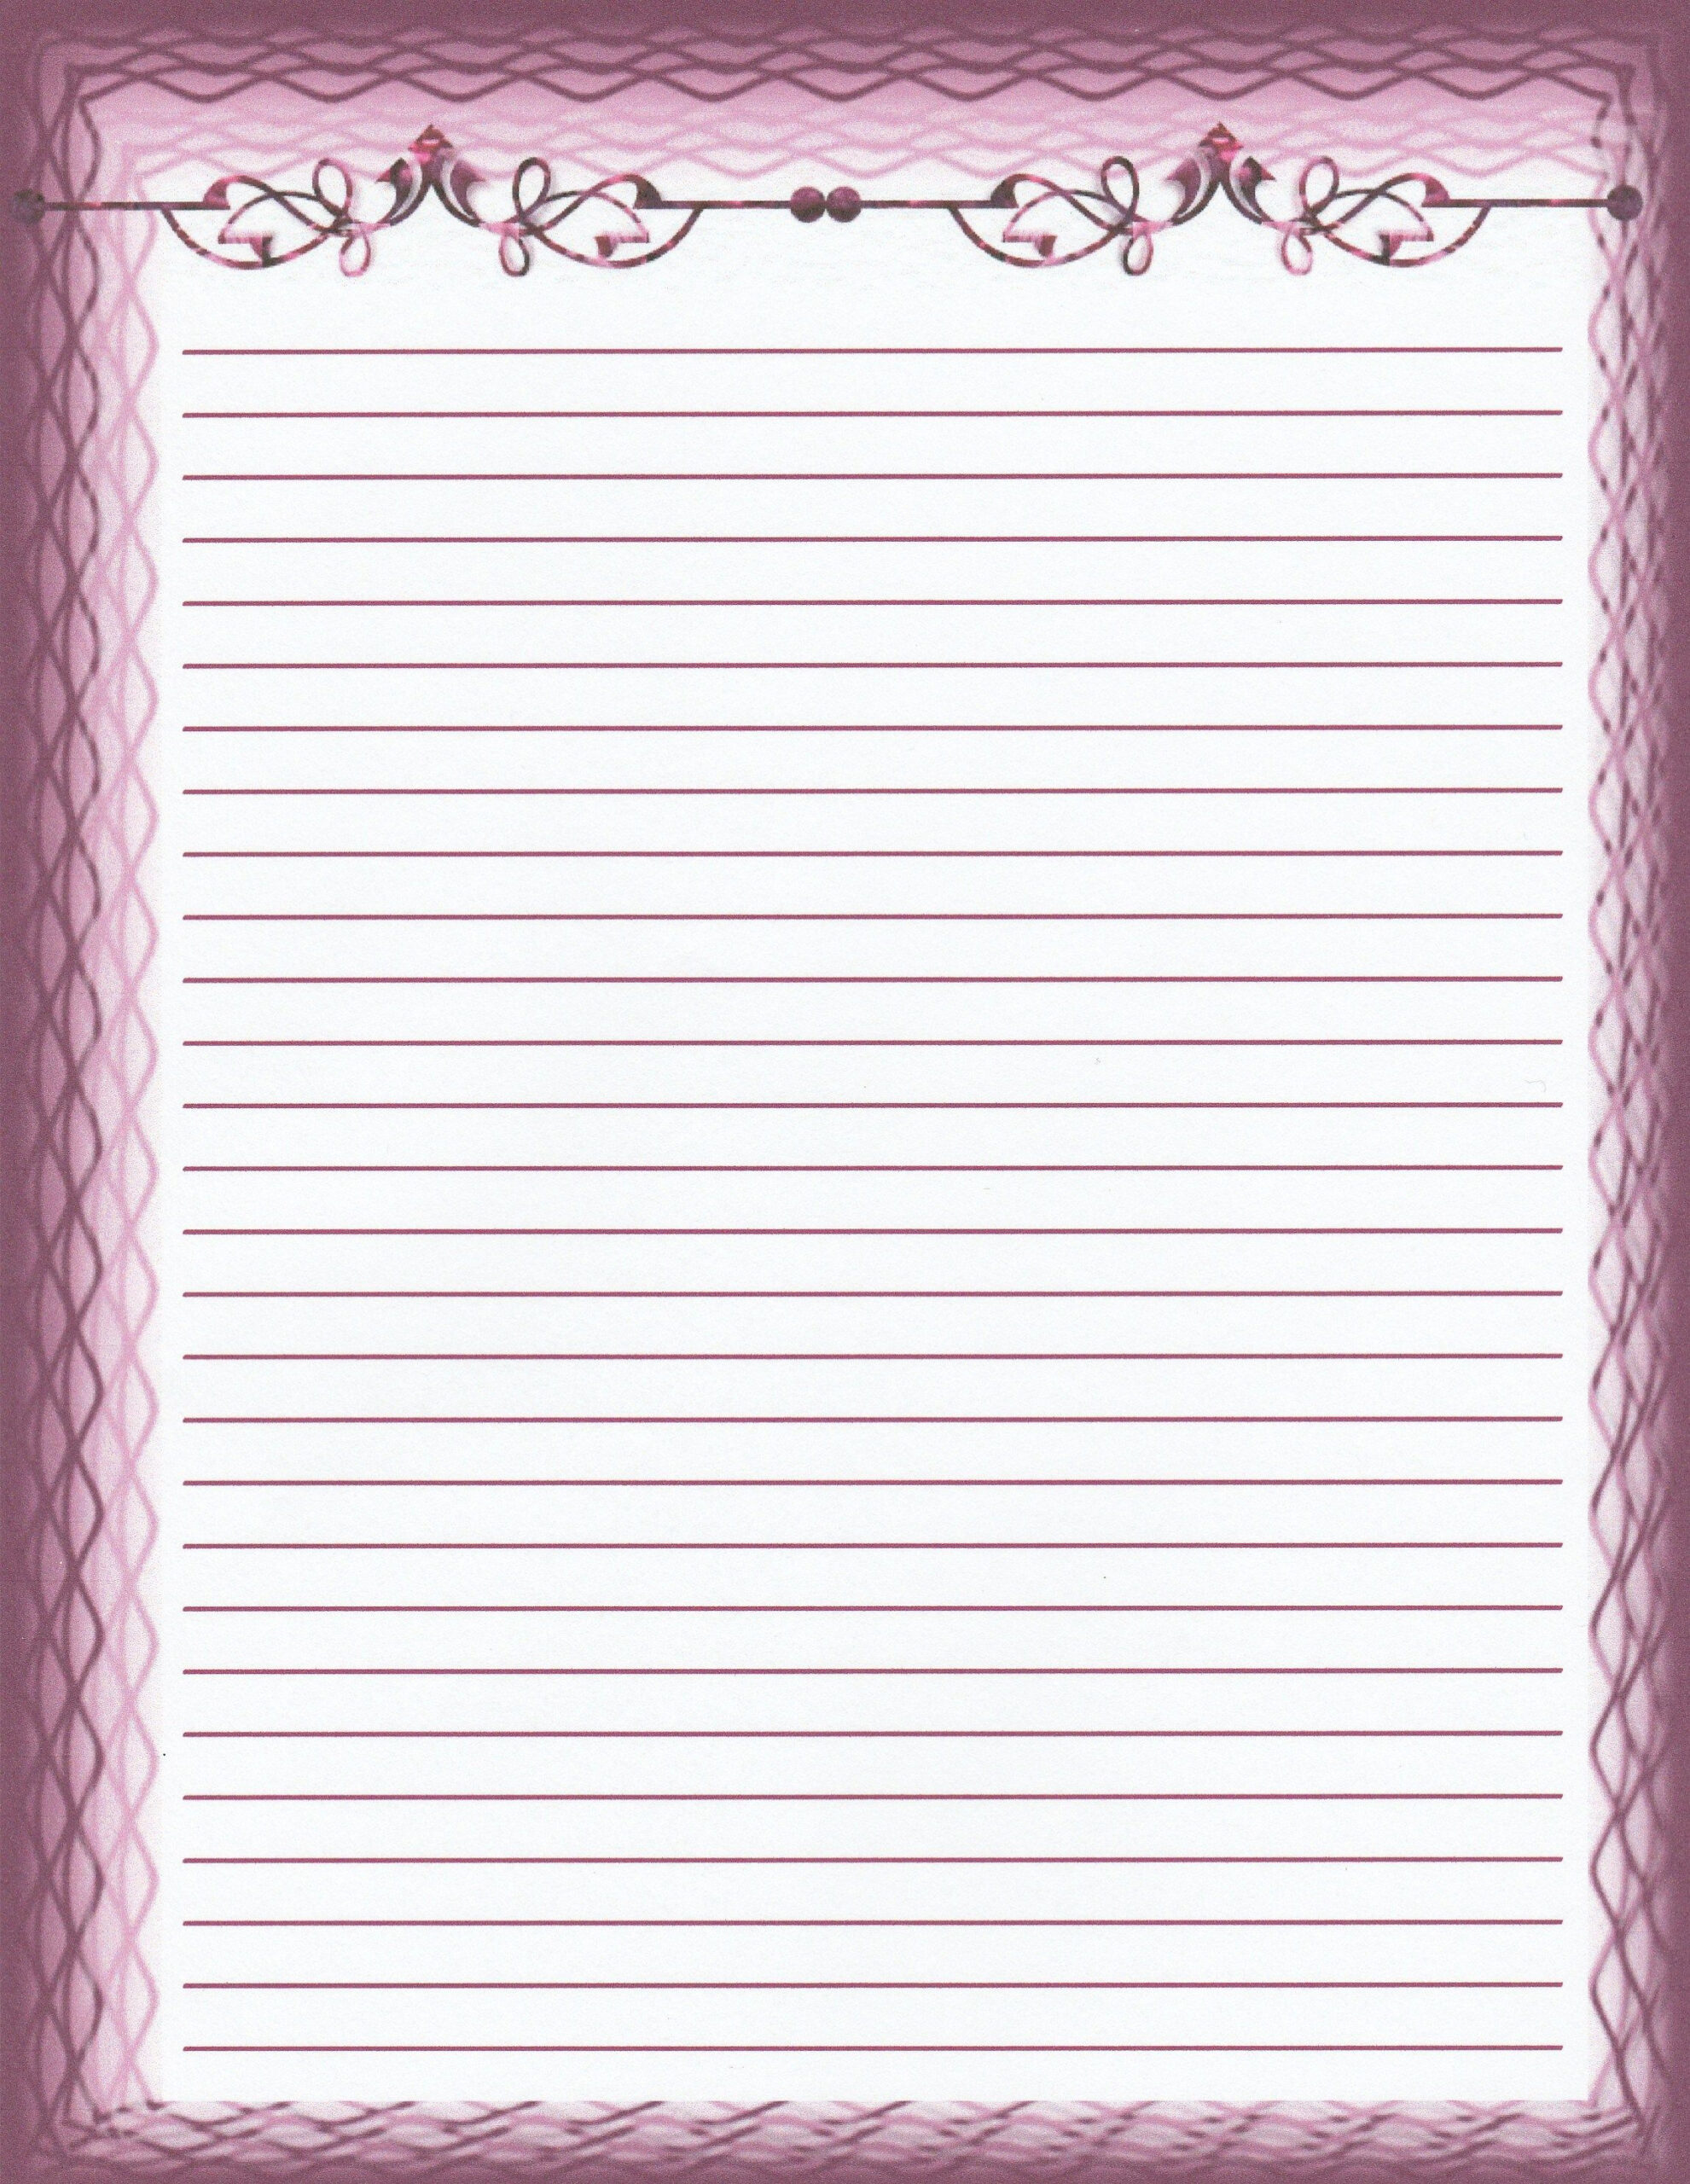 Lined Stationery Paper Printable